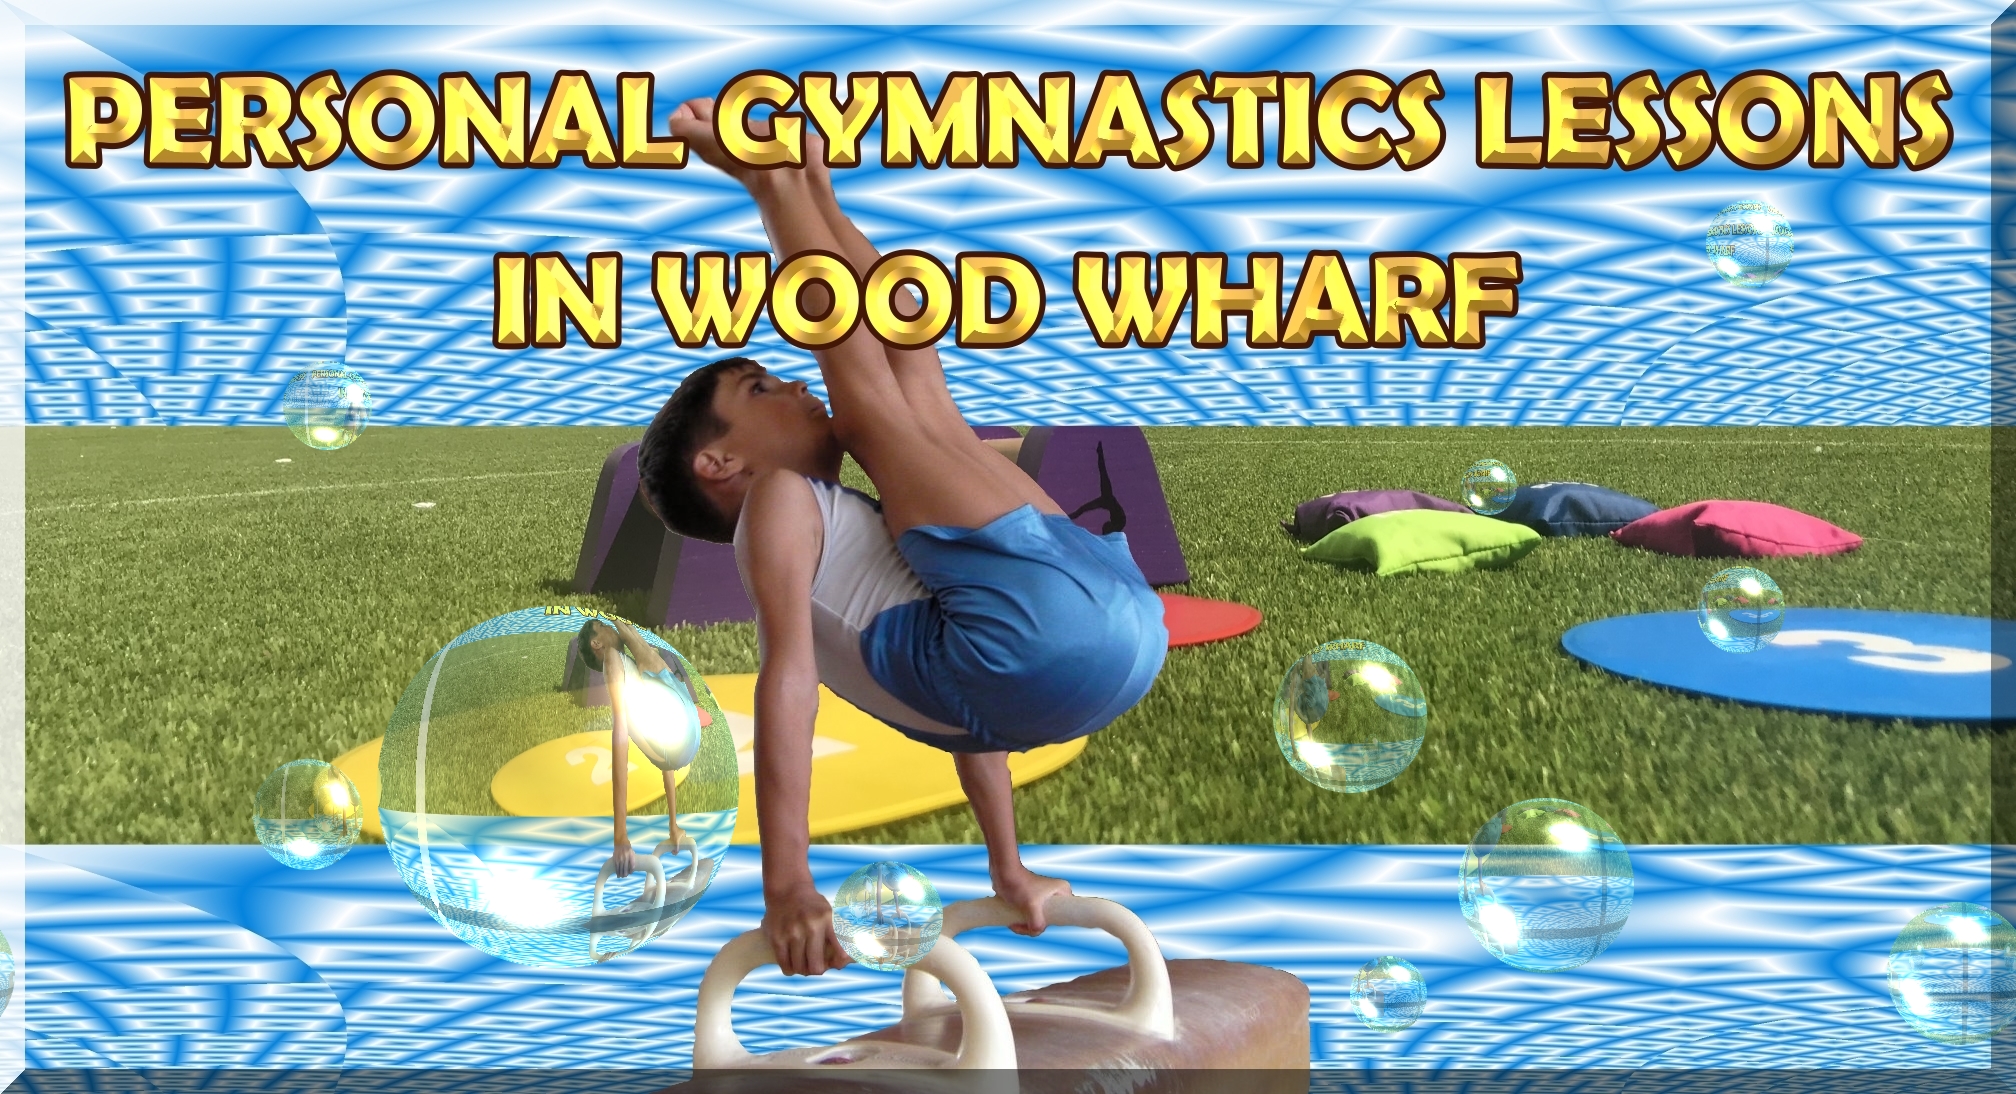 Gymnastics Classes for Children in Wood Wharf